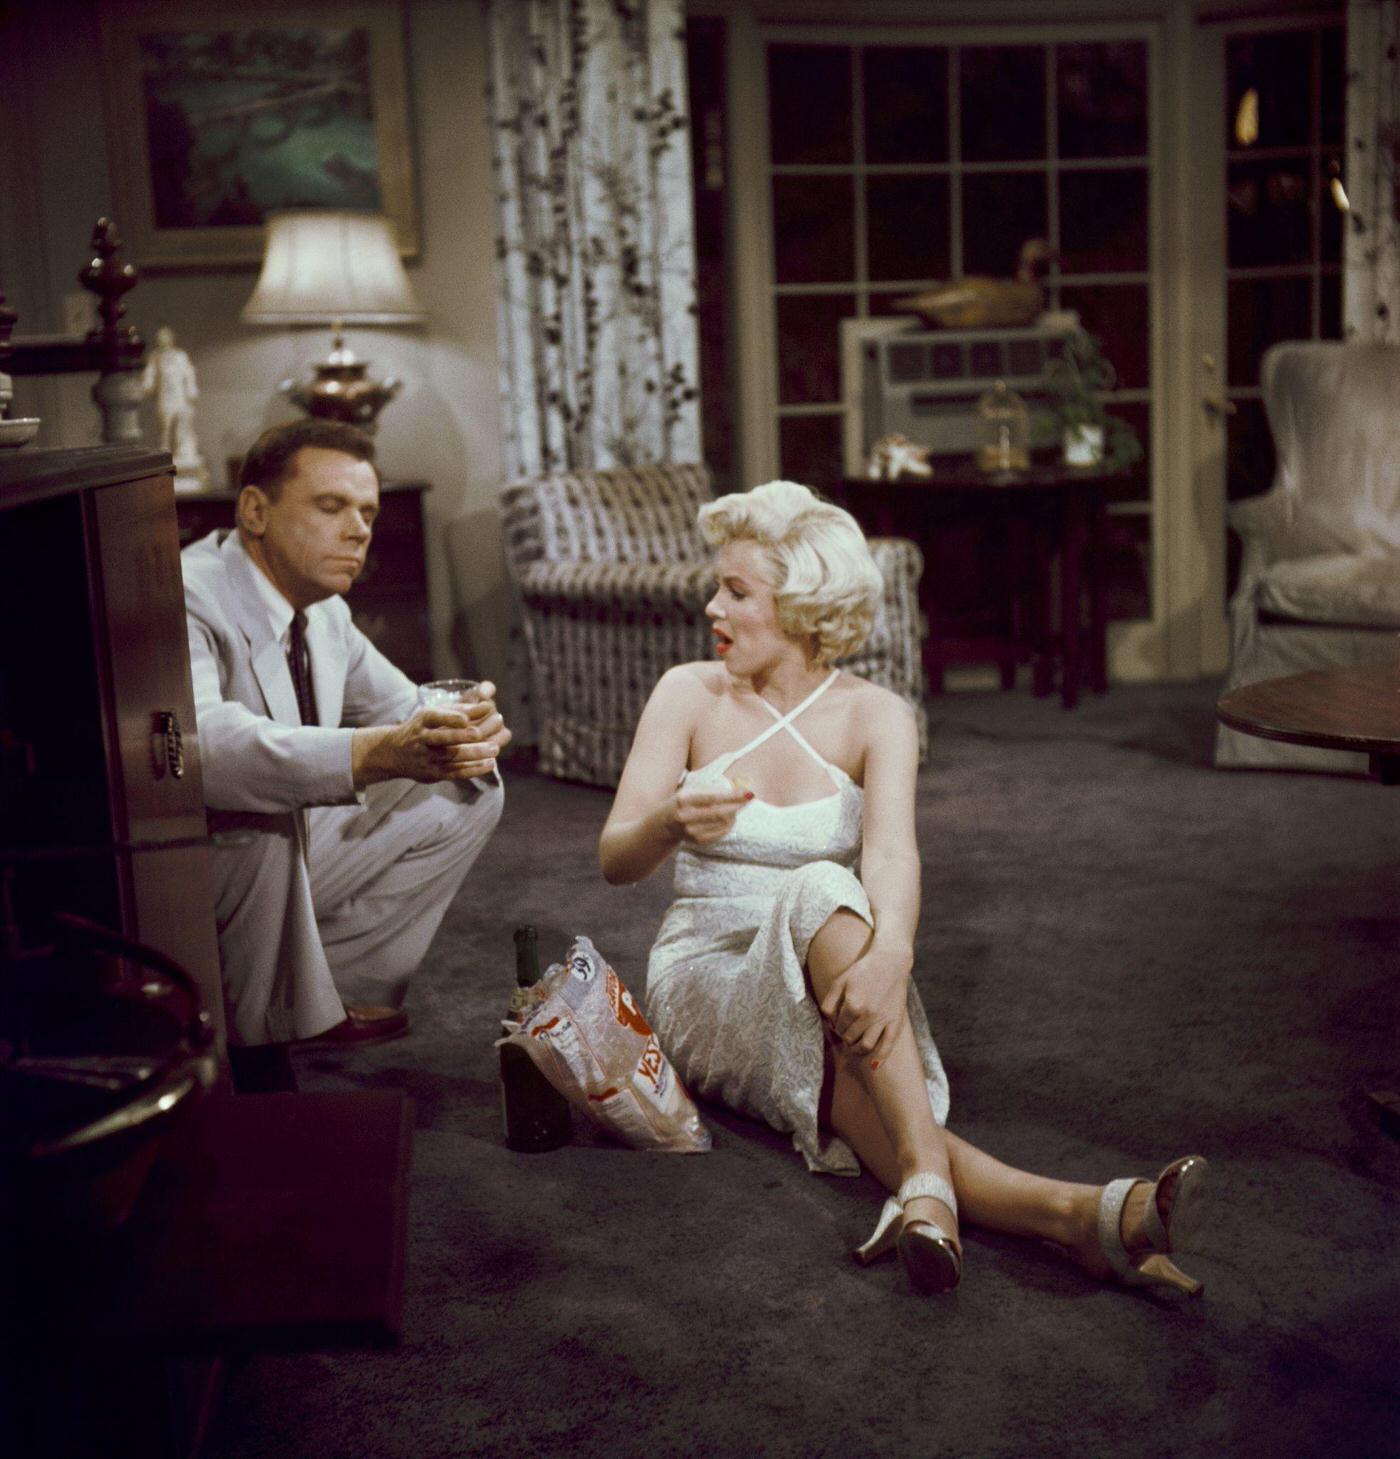 Marilyn Monroe eats potato chips and drinks champagne sitting on the floor with co-star Tom Ewell in 1954 during the filming of "The Seven Year Itch"